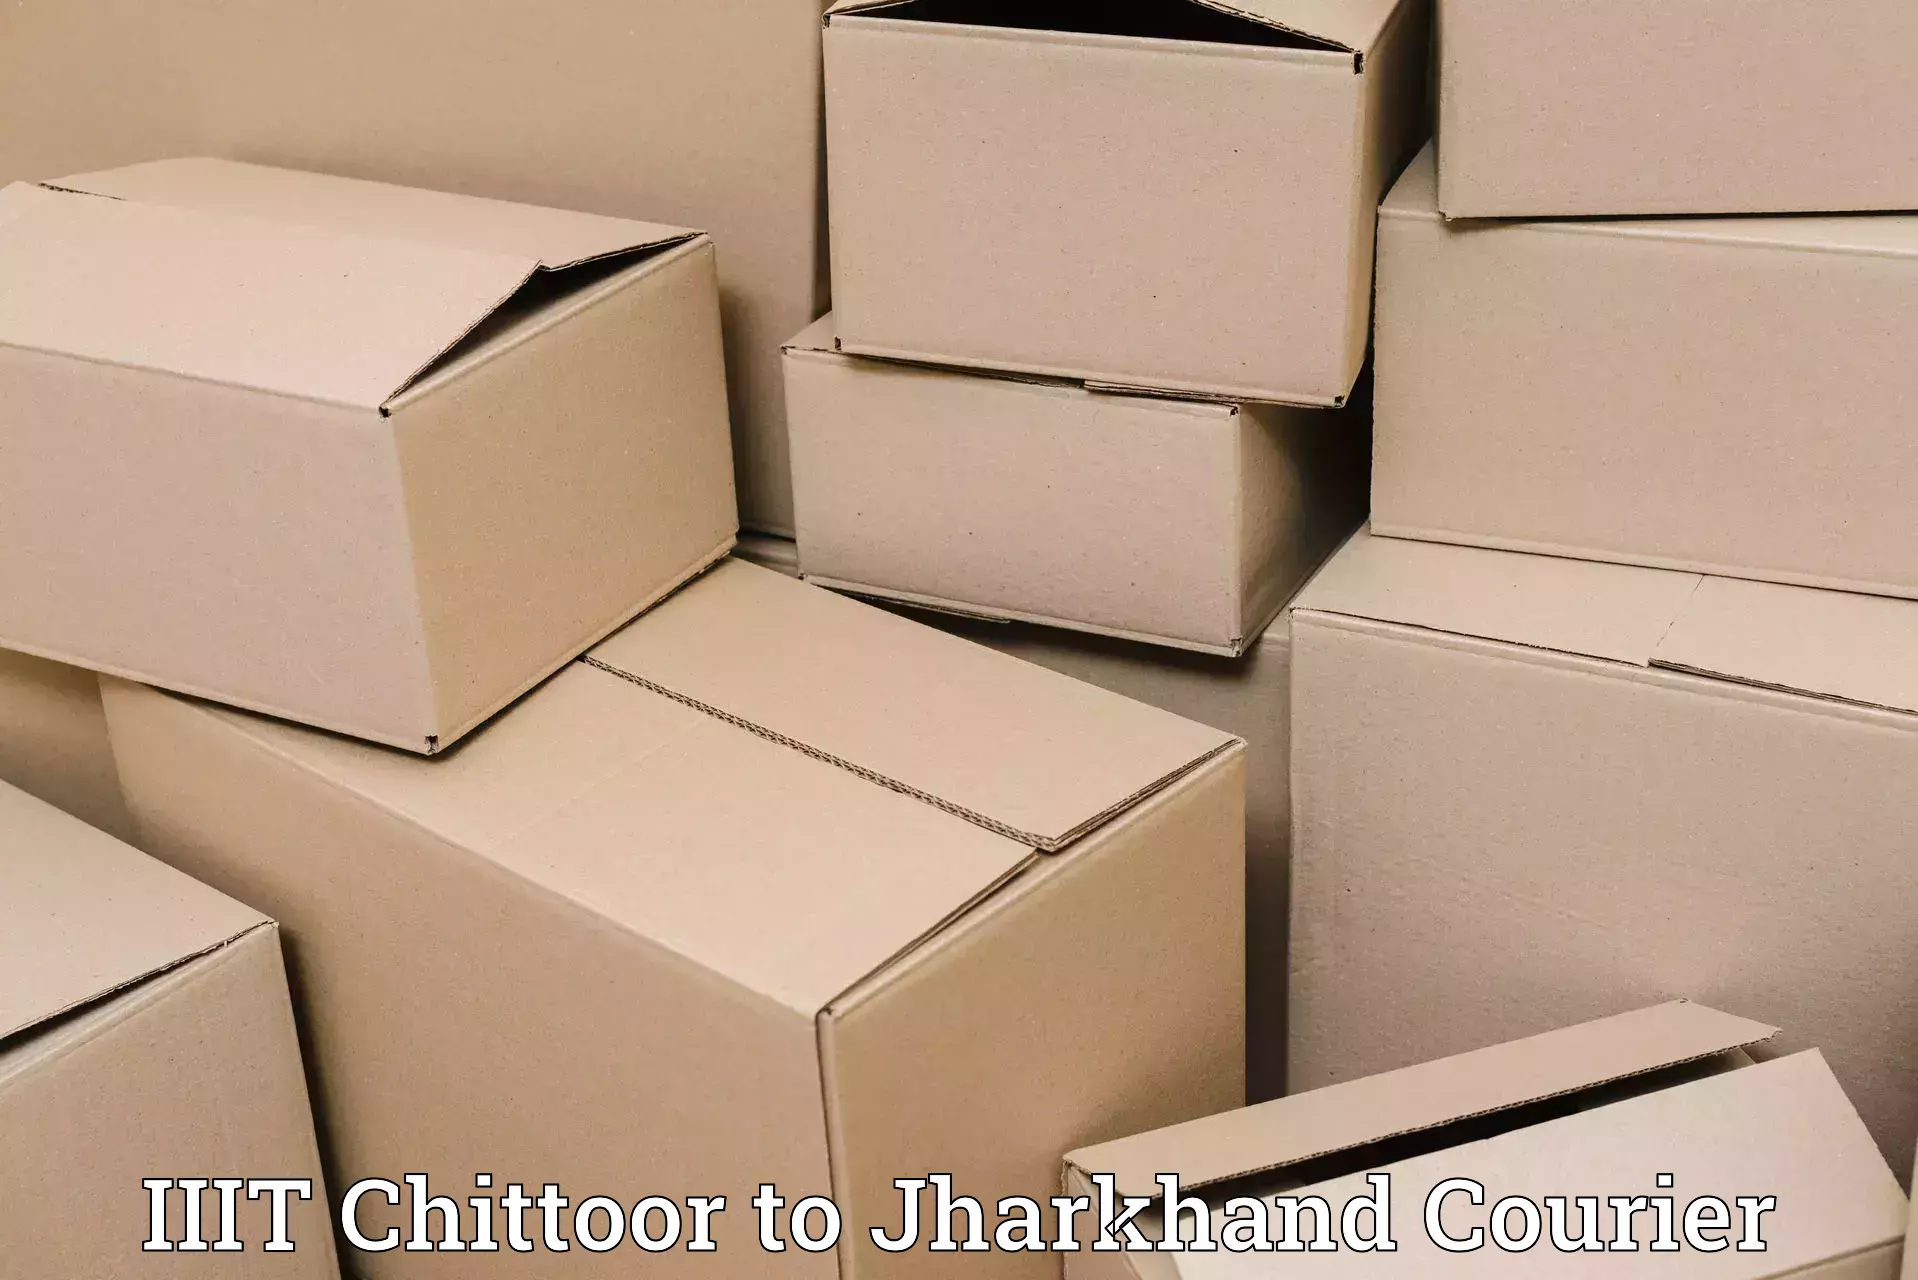 Courier services in IIIT Chittoor to Jamshedpur